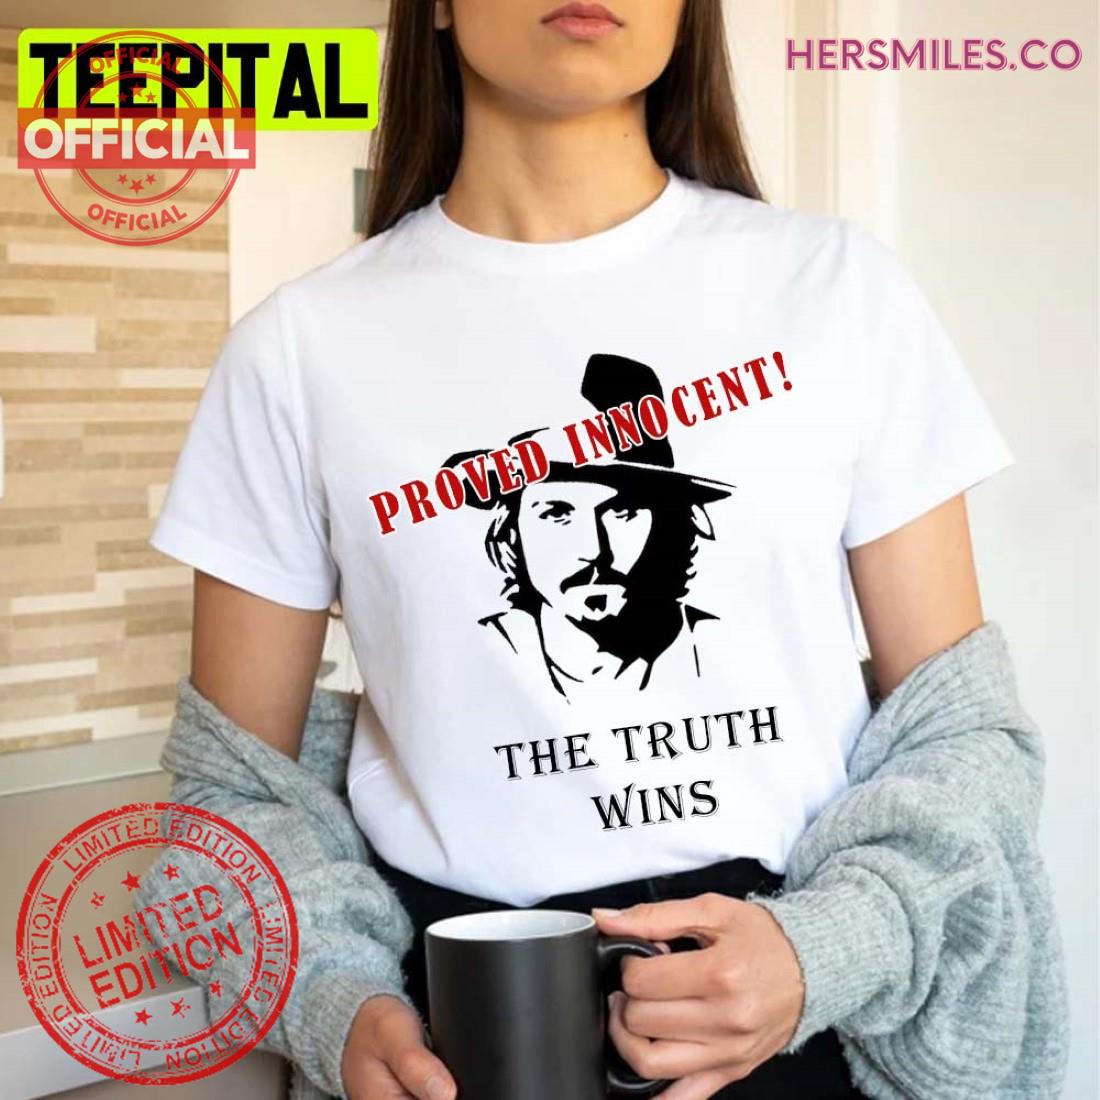 Proved Innocent Johnny Depp wins defamation lawsuit The Truth wins T-Shirt